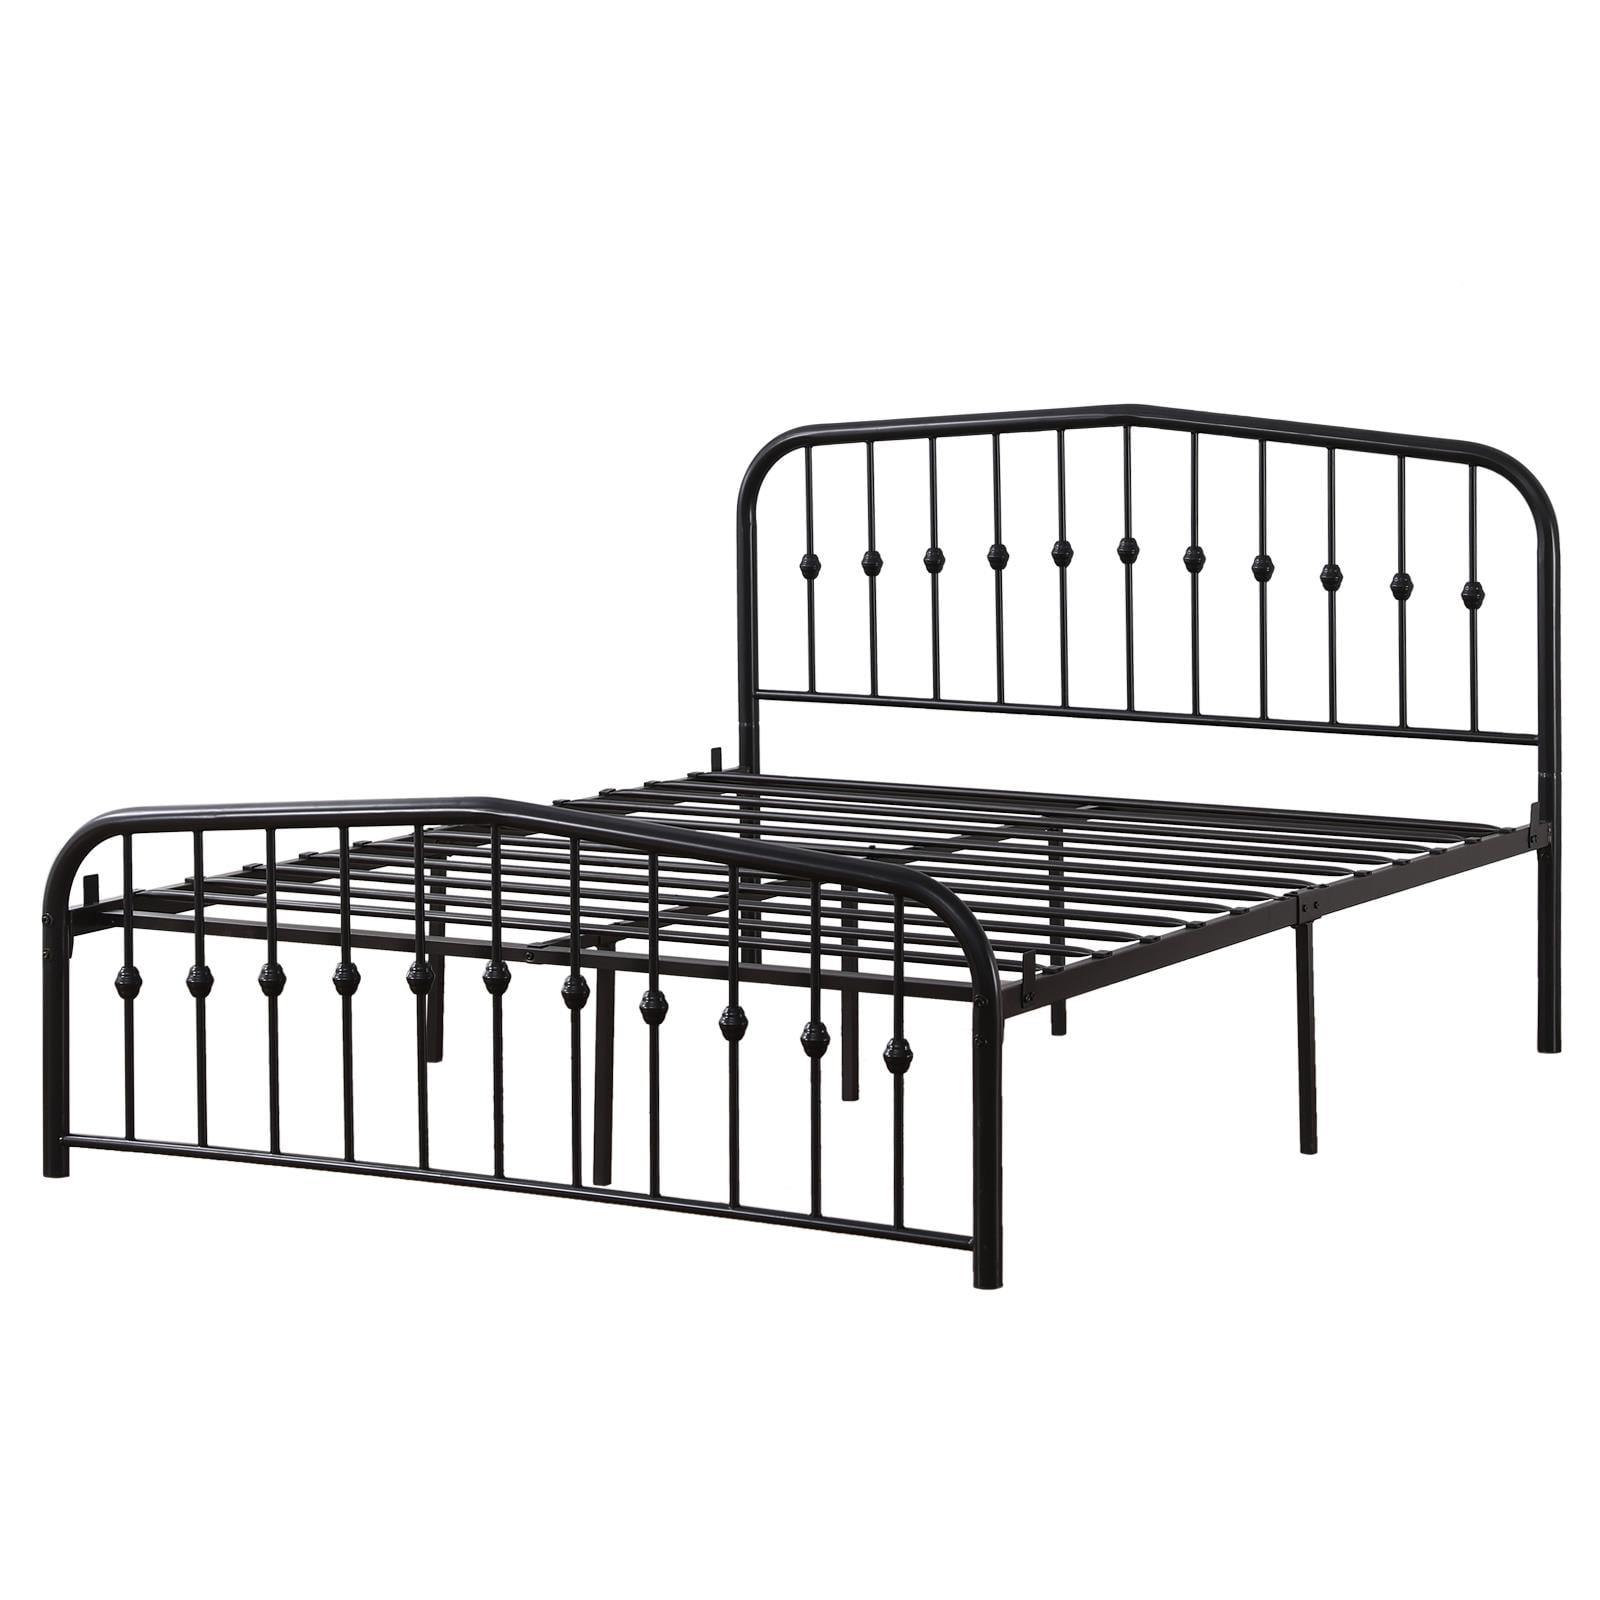 Details about   Queen Size Vintage Metal Bed Frame Platform with Headboard and Footboard 